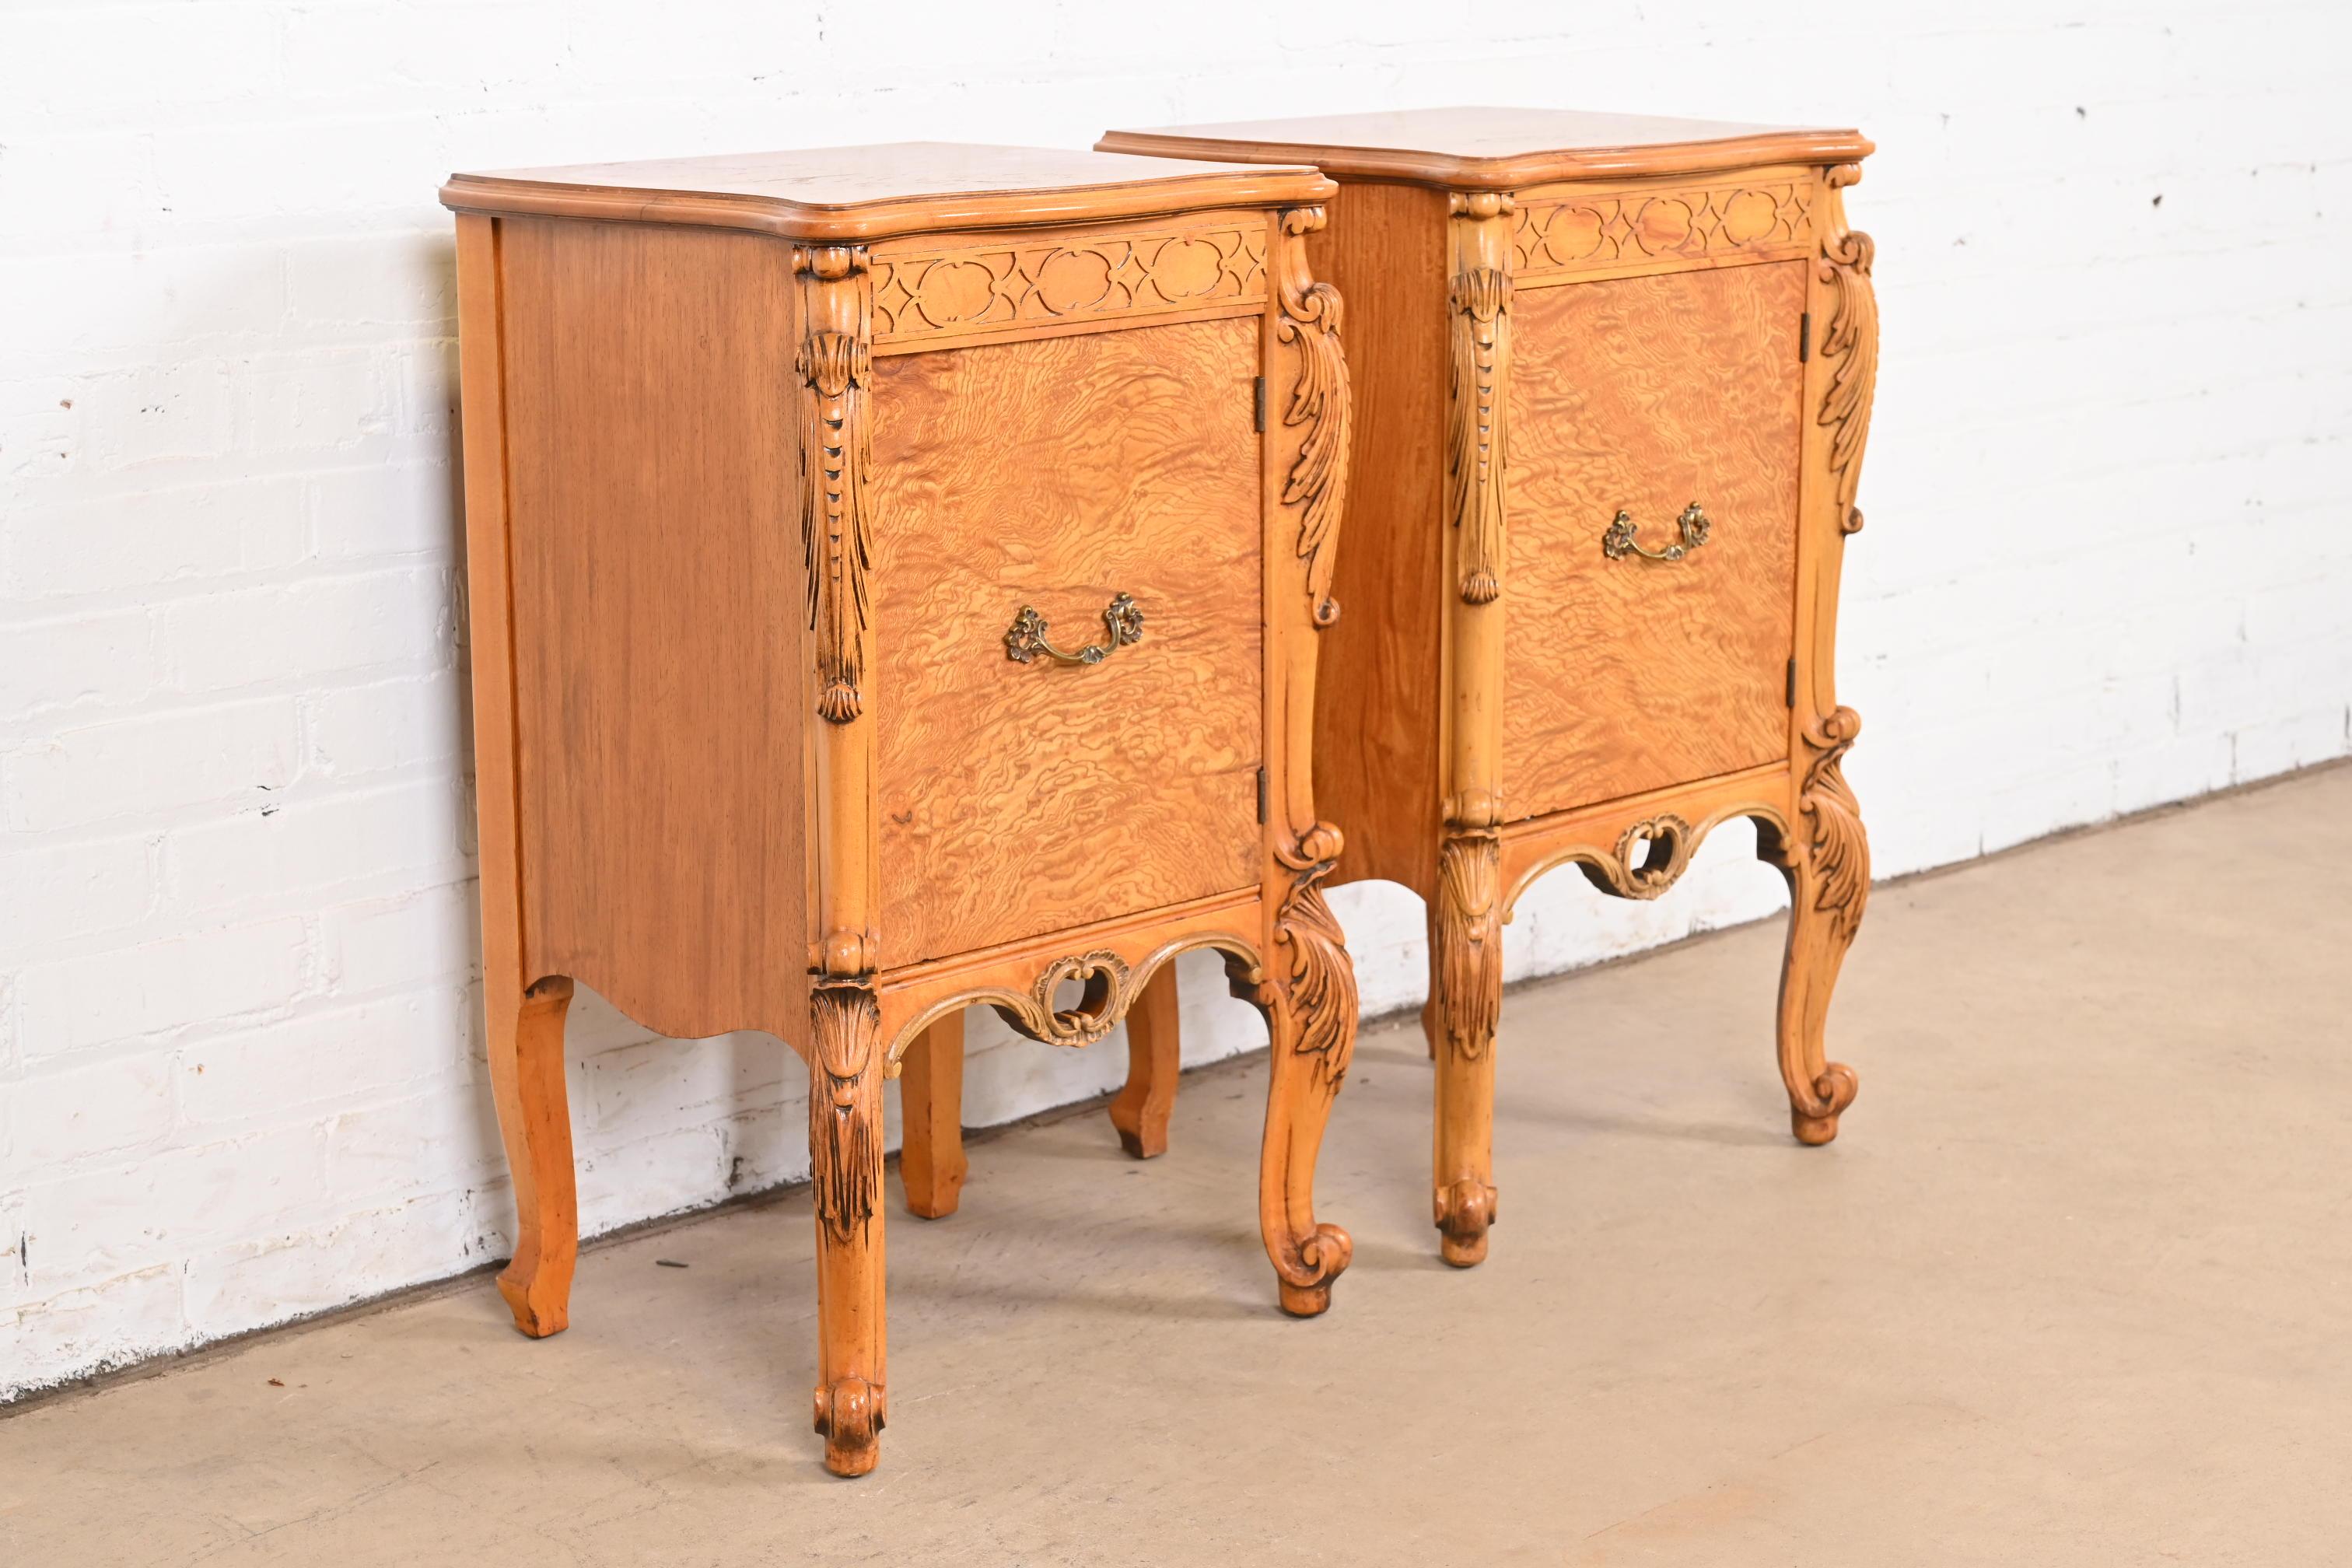 Brass Romweber French Provincial Louis XV Burl Wood Nightstands, Circa 1920s For Sale